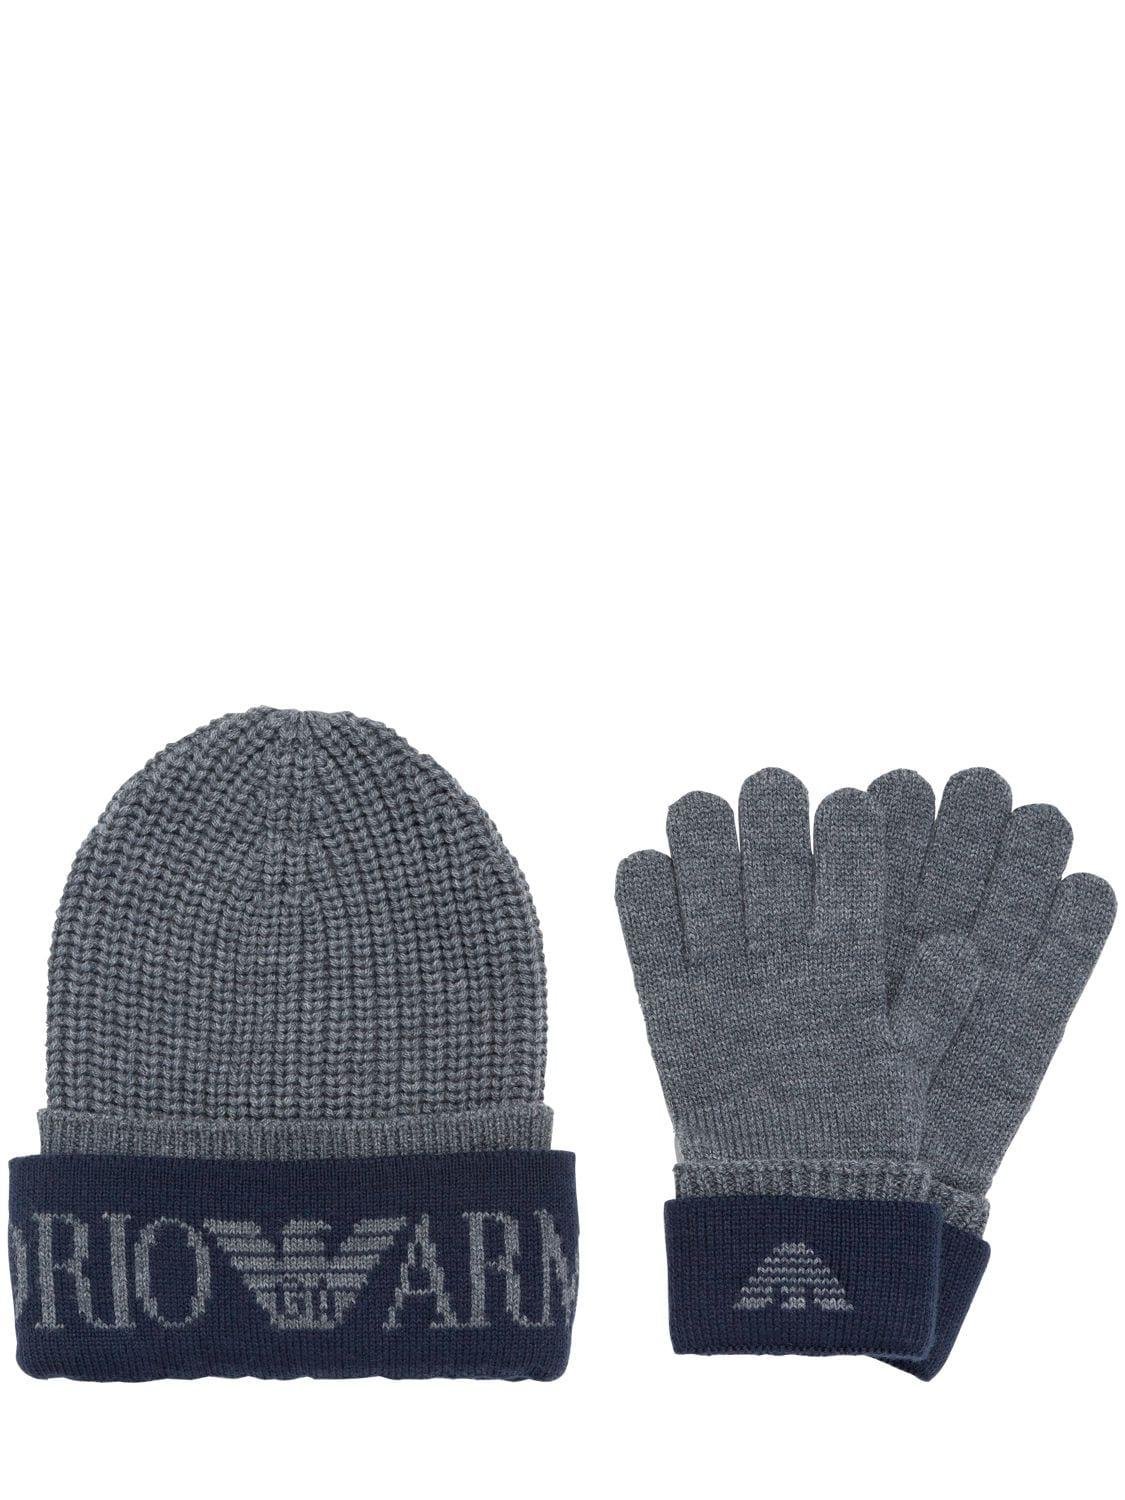 Wool Blend Knit Beanie & Gloves by EMPORIO ARMANI